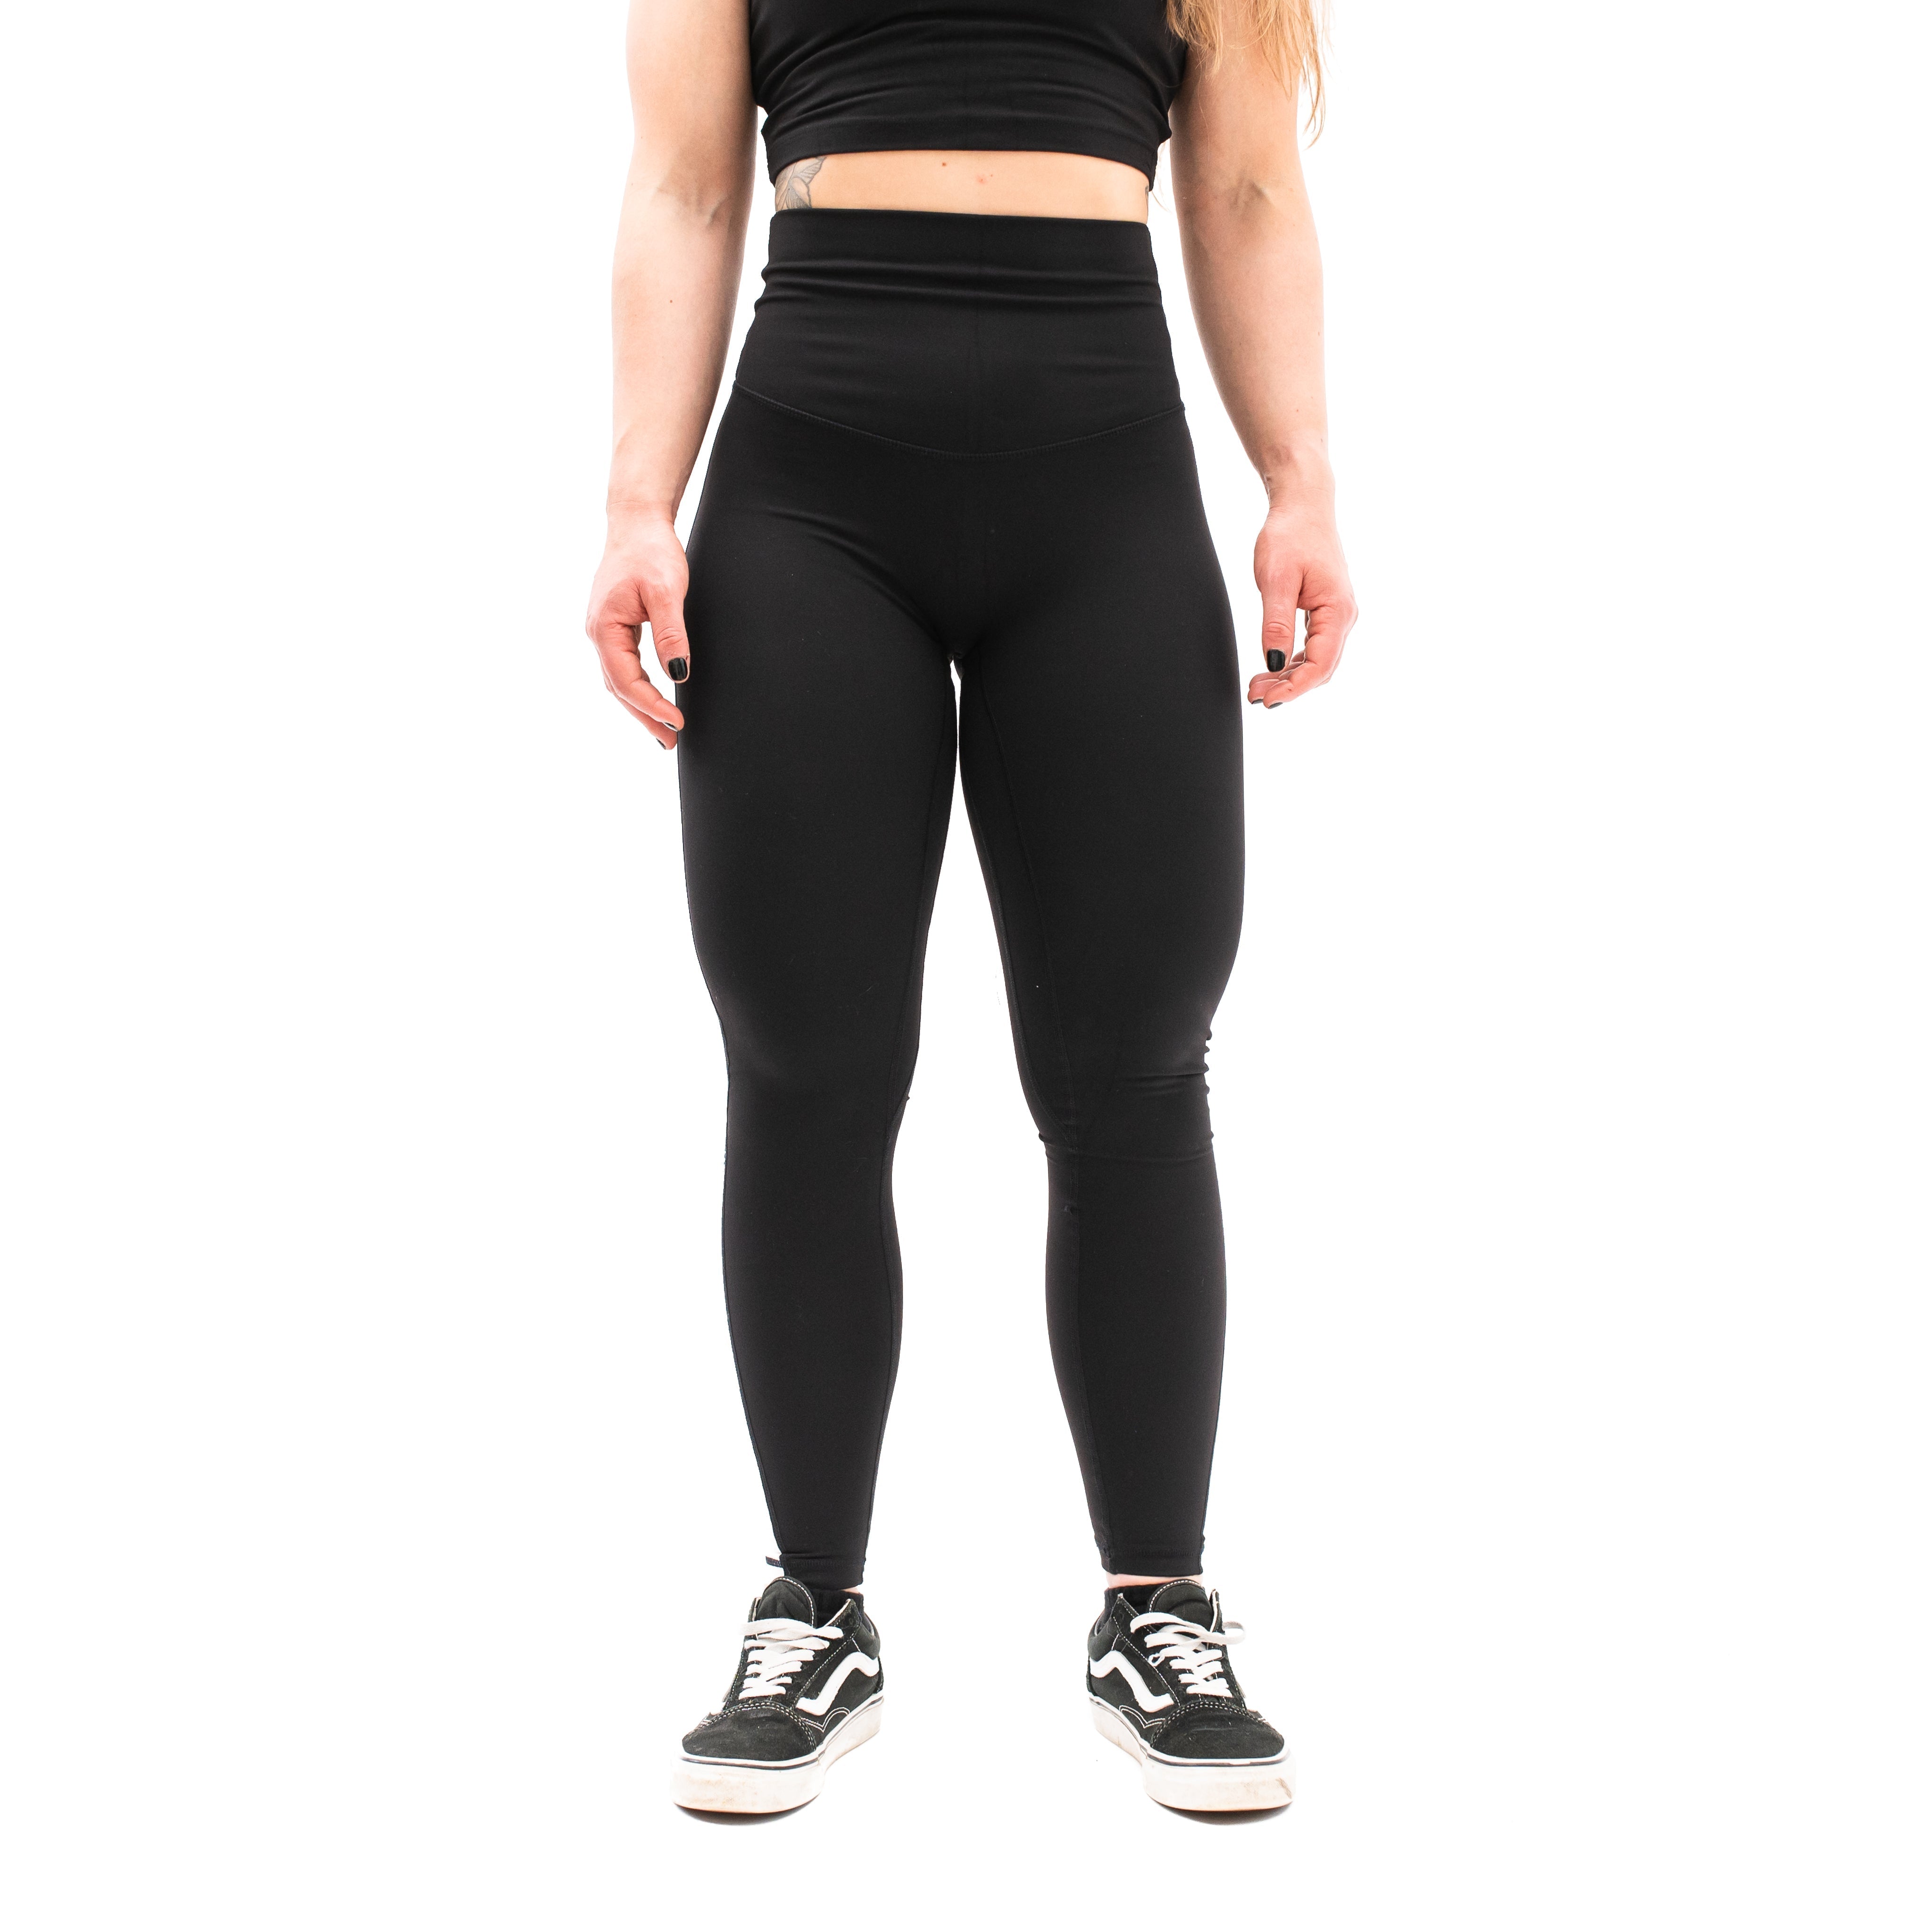 A7 XO Hew Leggings made from the same material as our XO Leggings, but are designed for 'thiccer' body types. The A7 XO Hew have high waistband to be more slimming around your waist and belly and have no seam line on the front for more comfortable movement. Purchase A7 XO Hew Leggings from A7 UK for shipping to UK and Europe. Women’s leggings for powerlifting and training in the gym. Weightlifting leggings for women.